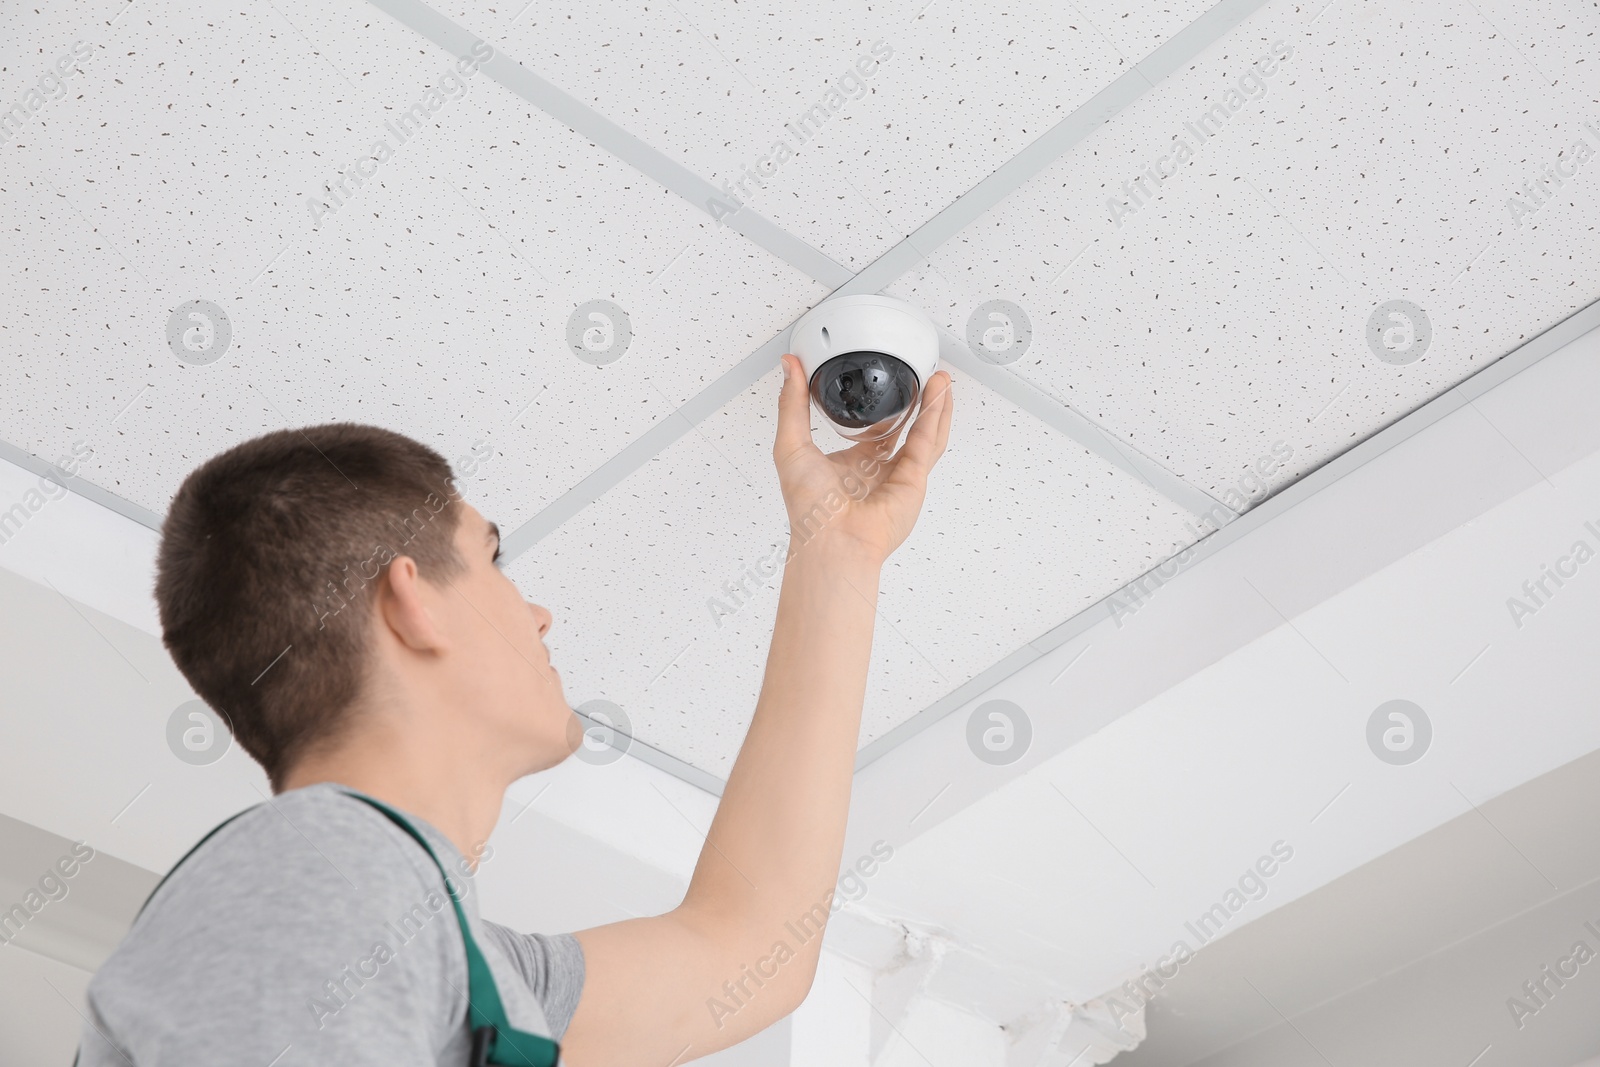 Photo of Technician installing CCTV camera on ceiling indoors, low angle view